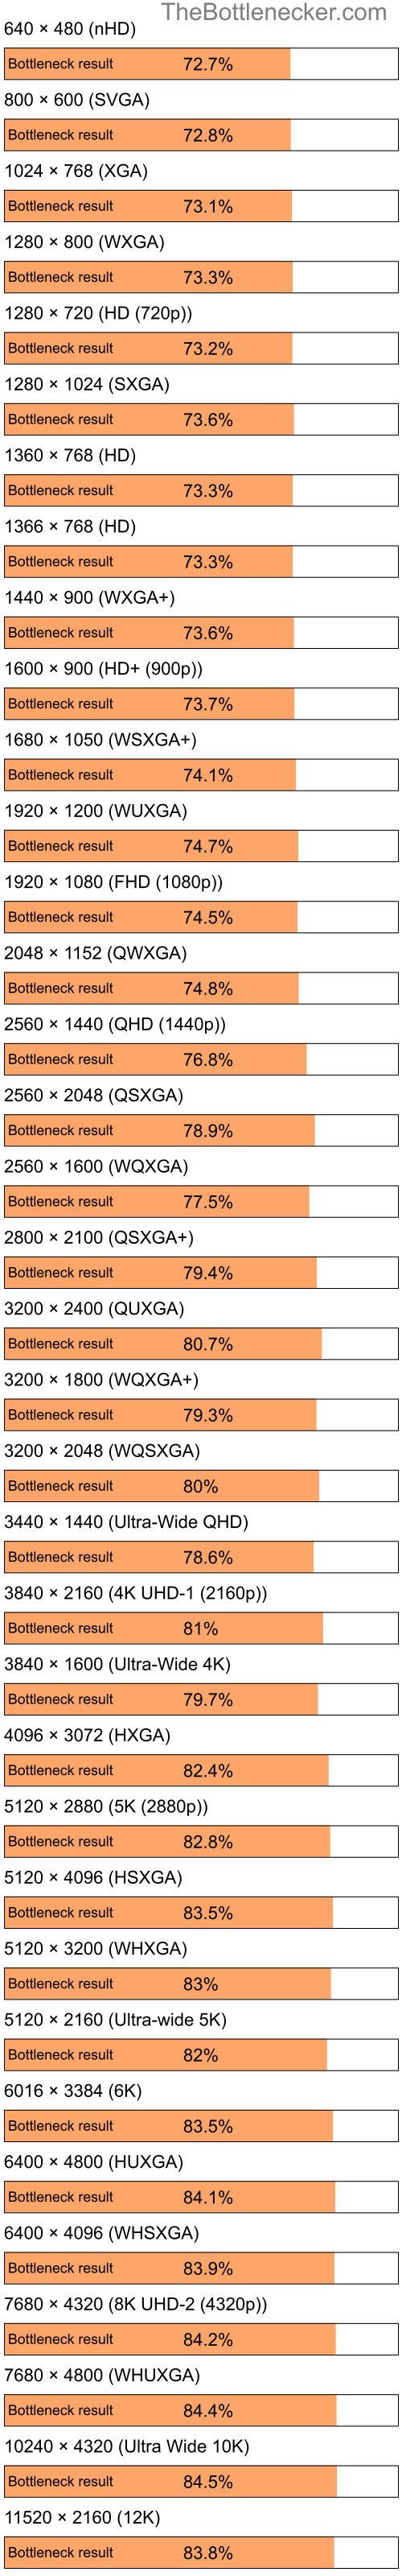 Bottleneck results by resolution for Intel Atom Z520 and AMD Radeon Xpress 1250 in General Tasks